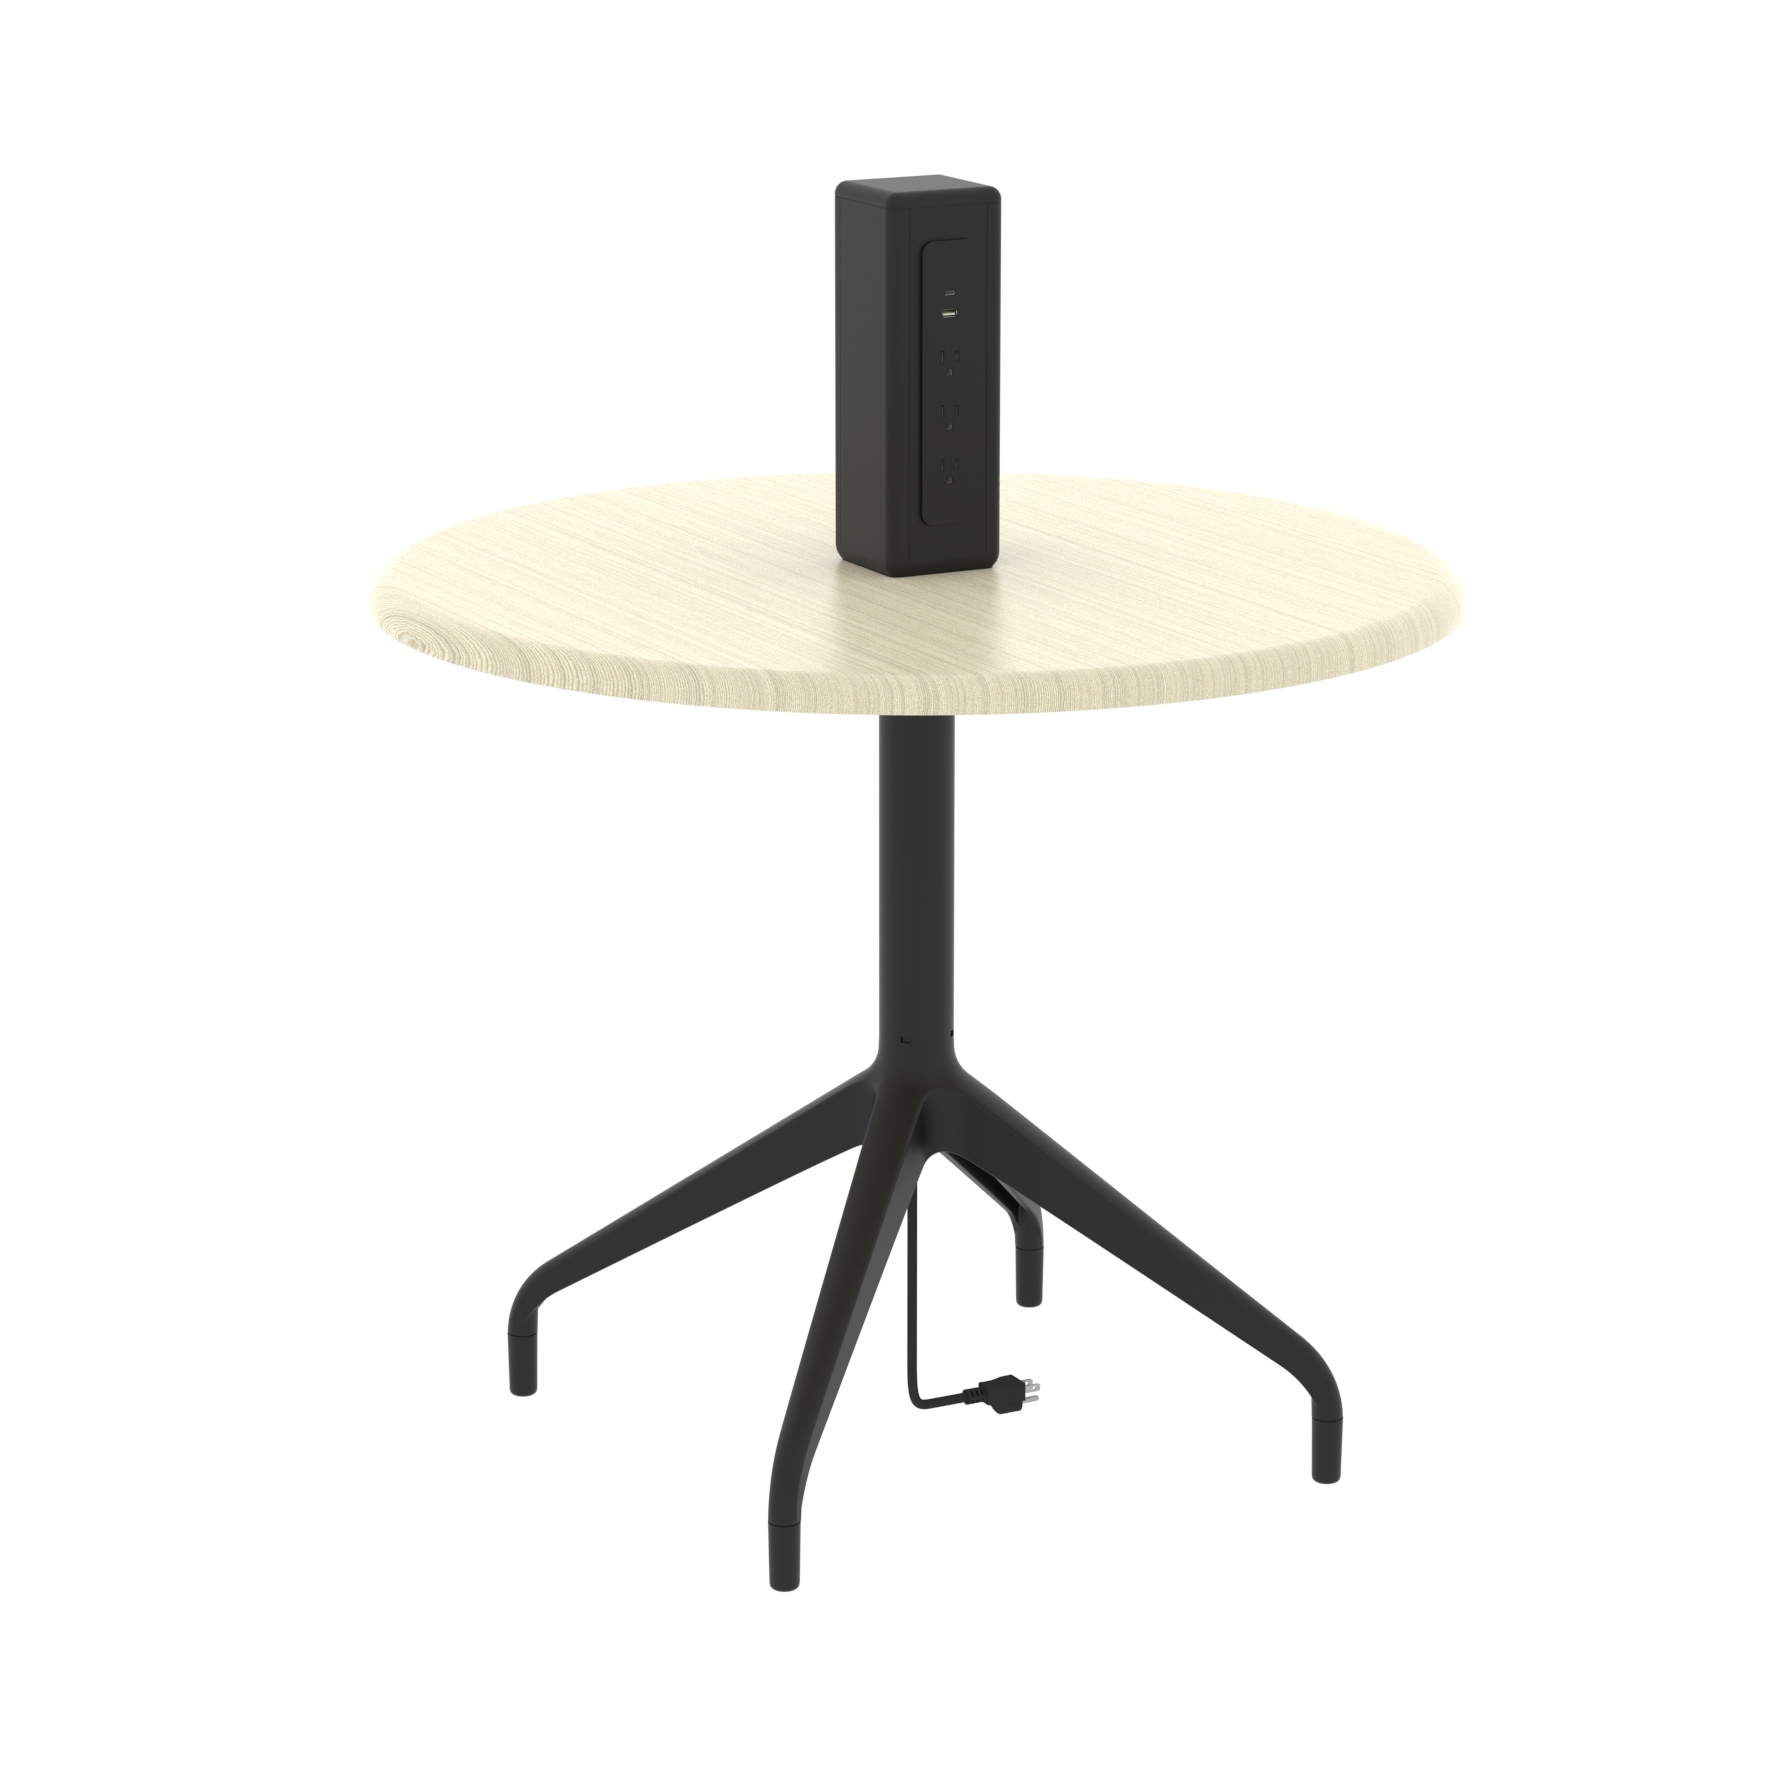 Modern Design Leisure Coffee Table Occasional Round Table